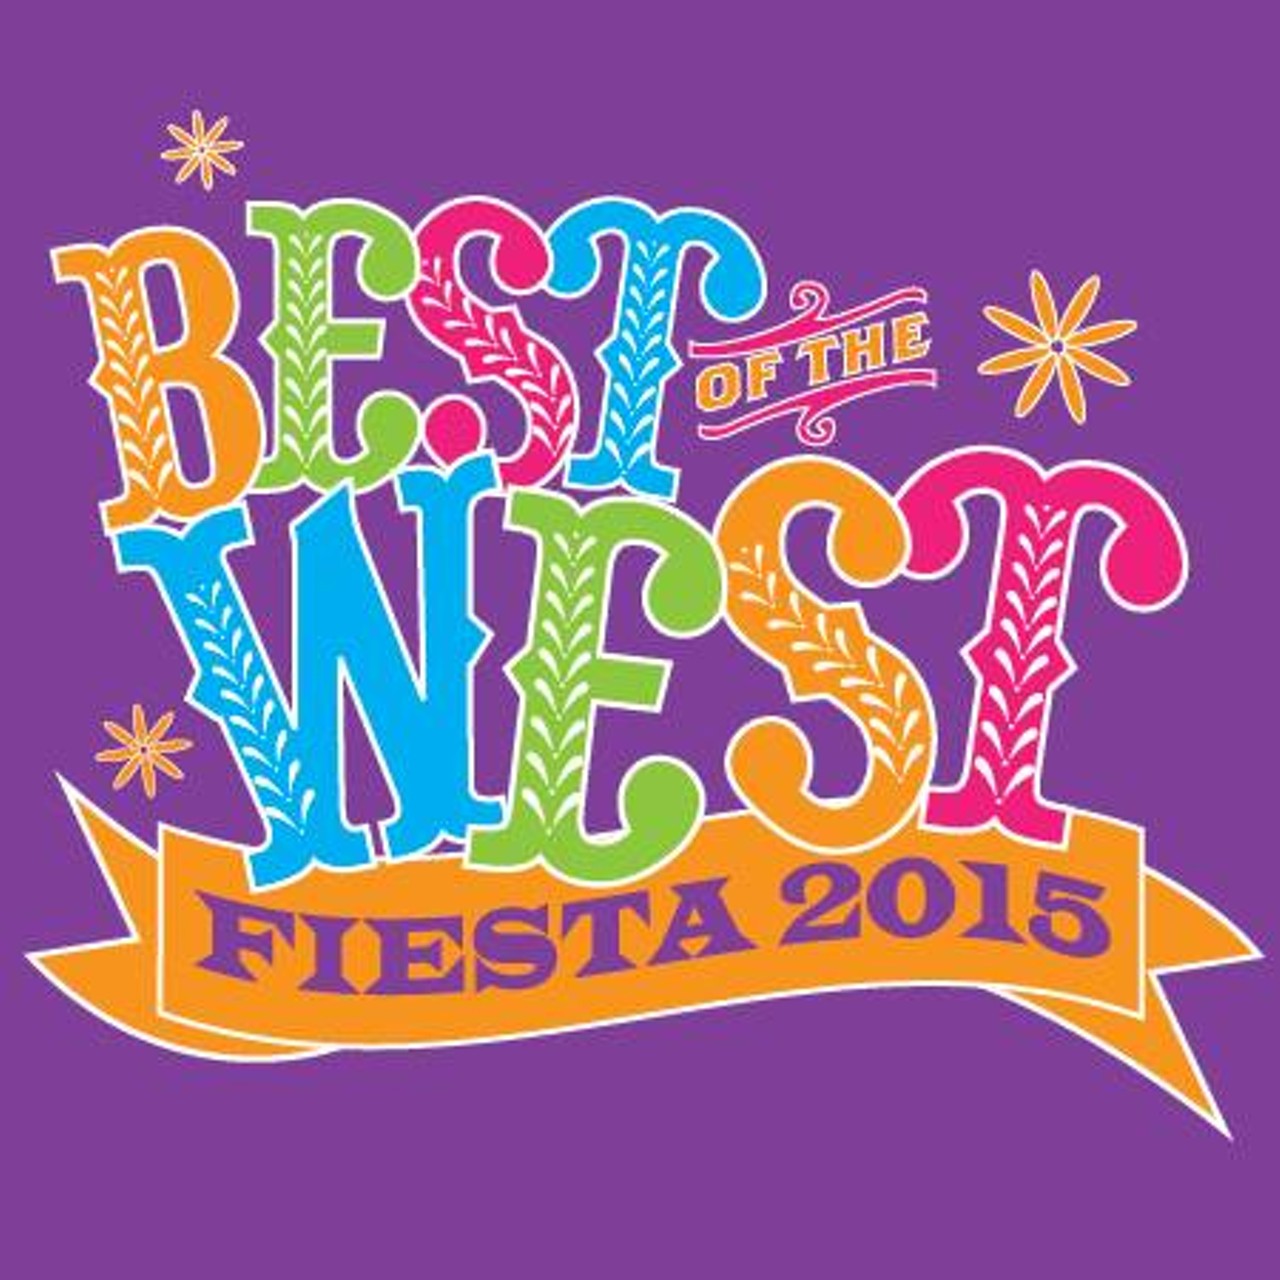 SPONSORED
Best of the West!
Date: Apr 11, 2015
Time: 04:00 PM - 11:00 PM
Location: Our Lady of the Lake Campus
Best of the West raises funds for student scholarships while providing a fun family-friendly event celebrating the music, art and food of the West Side of San Antonio. As a Catholic university sponsored by the Sisters of Divine Providence, Our Lady of the Lake University is a community whose members are committed to serve students by ensuring quality, innovative undergraduate and graduate learning experiences; fostering spiritual, personal and professional growth; and preparing students for success and continued service.
Admission is free.? Event website.